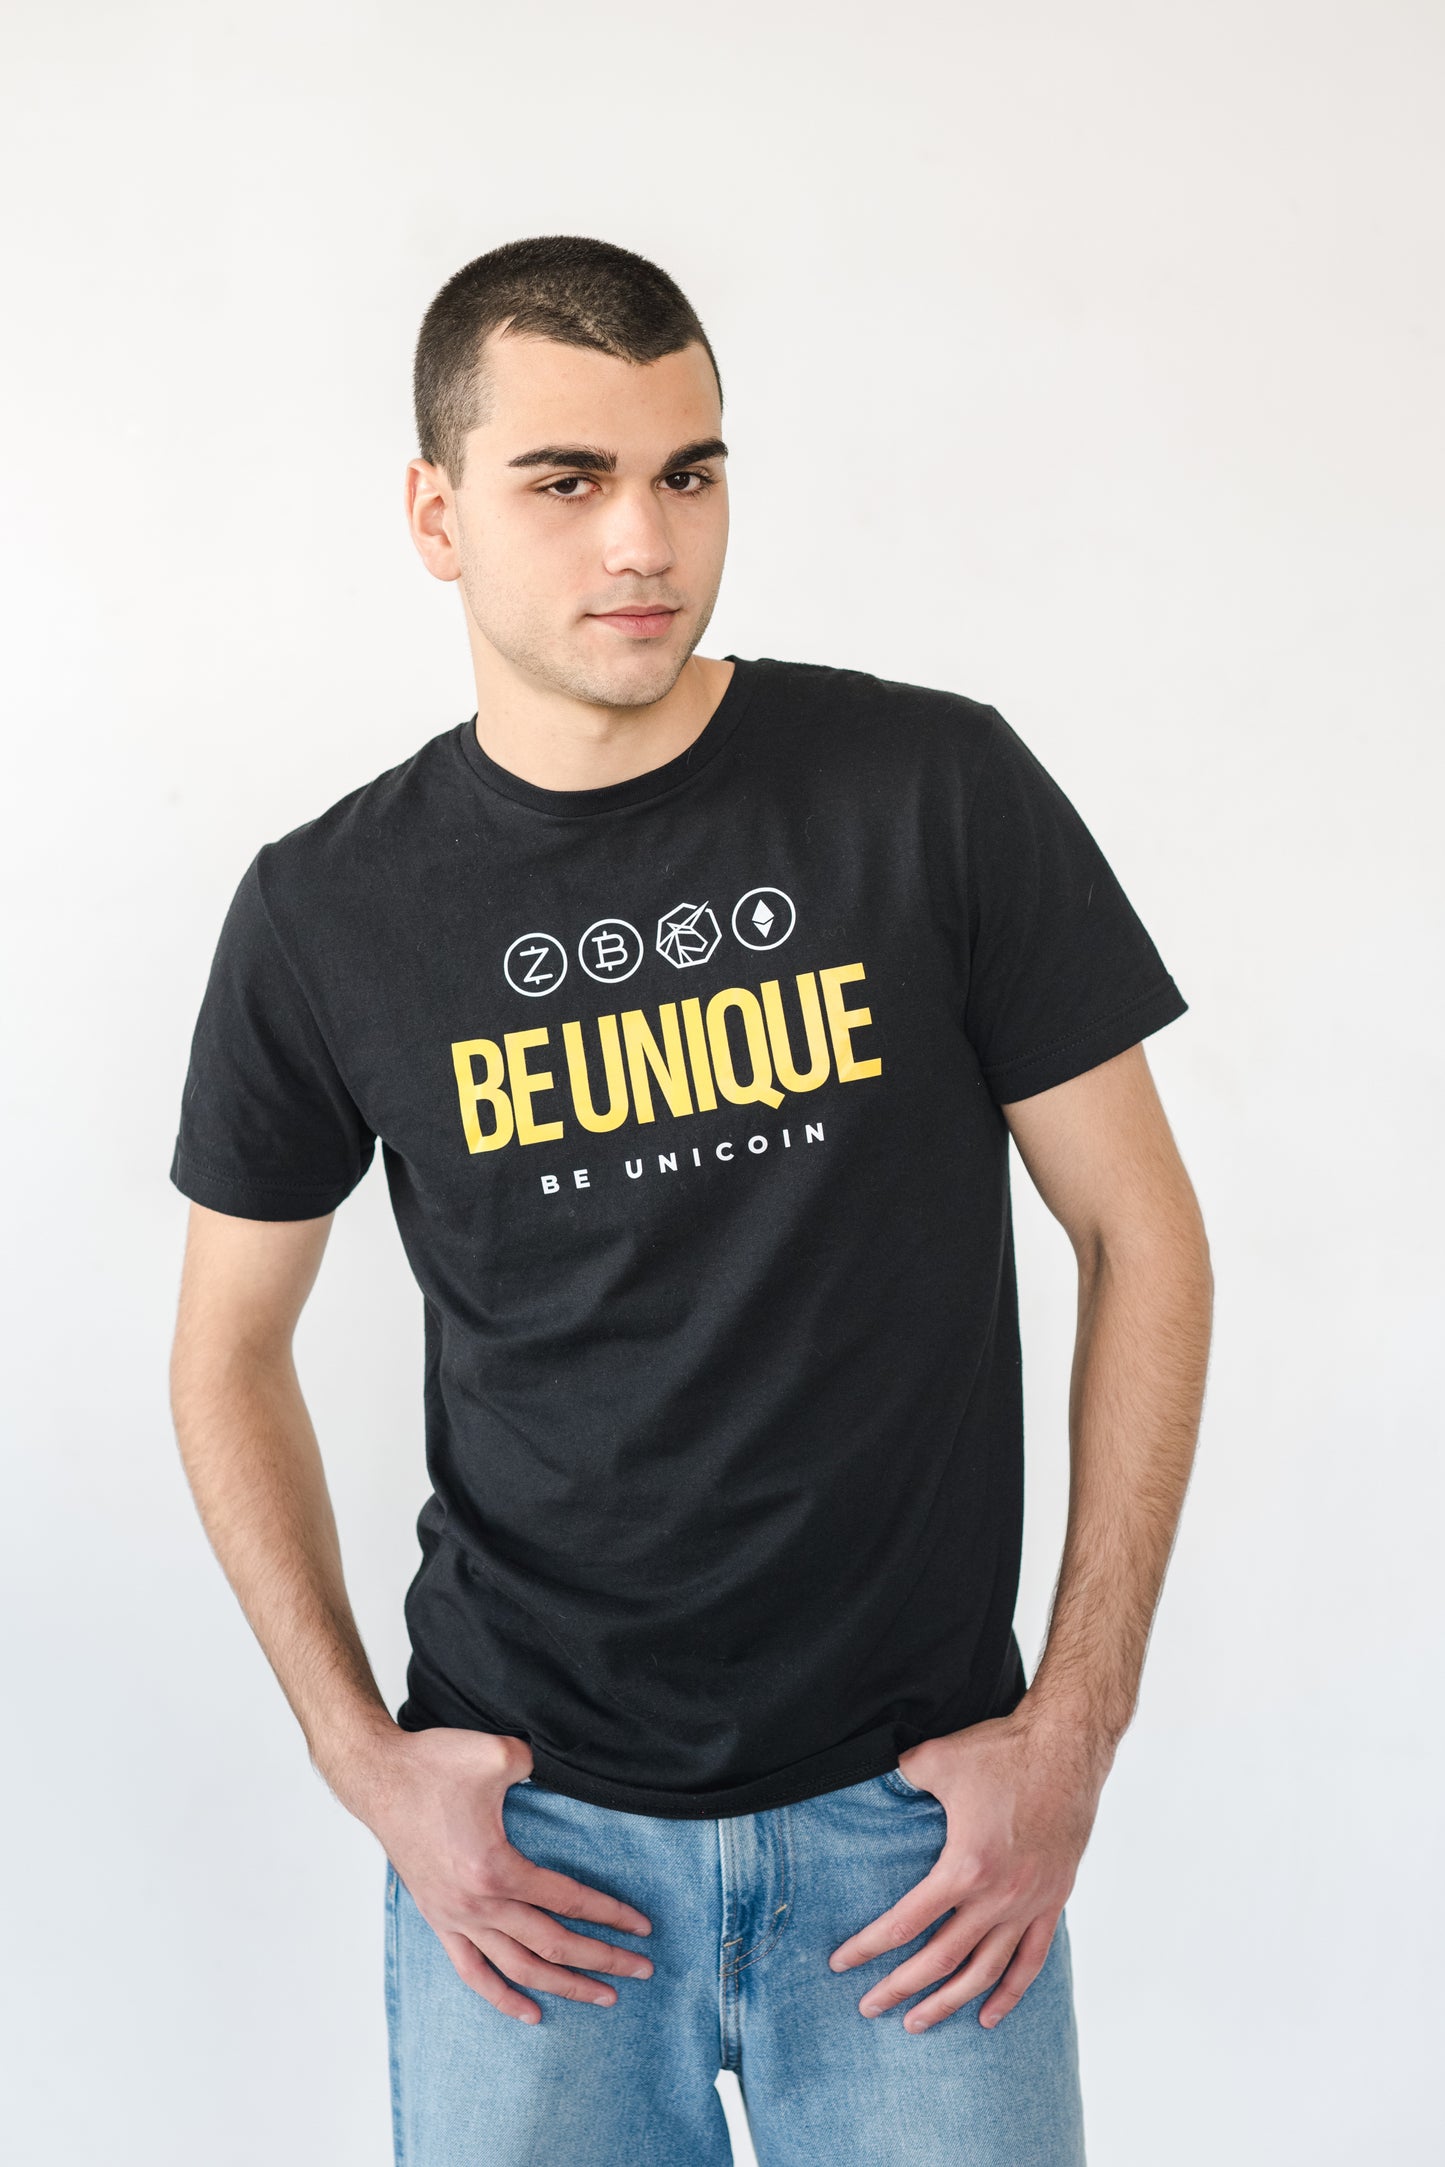 Be unique, tshirt for cryto users,  Tshirt for crypto users, Upgrade your wardrobe with our luxurious premium organic cotton tees, crafted for unbeatable comfort and timeless elegance. Made from 100% organic cotton, these short-sleeve tees are machine washable for easy care. Enjoy a soft touch and elevate your everyday style effortlessly.